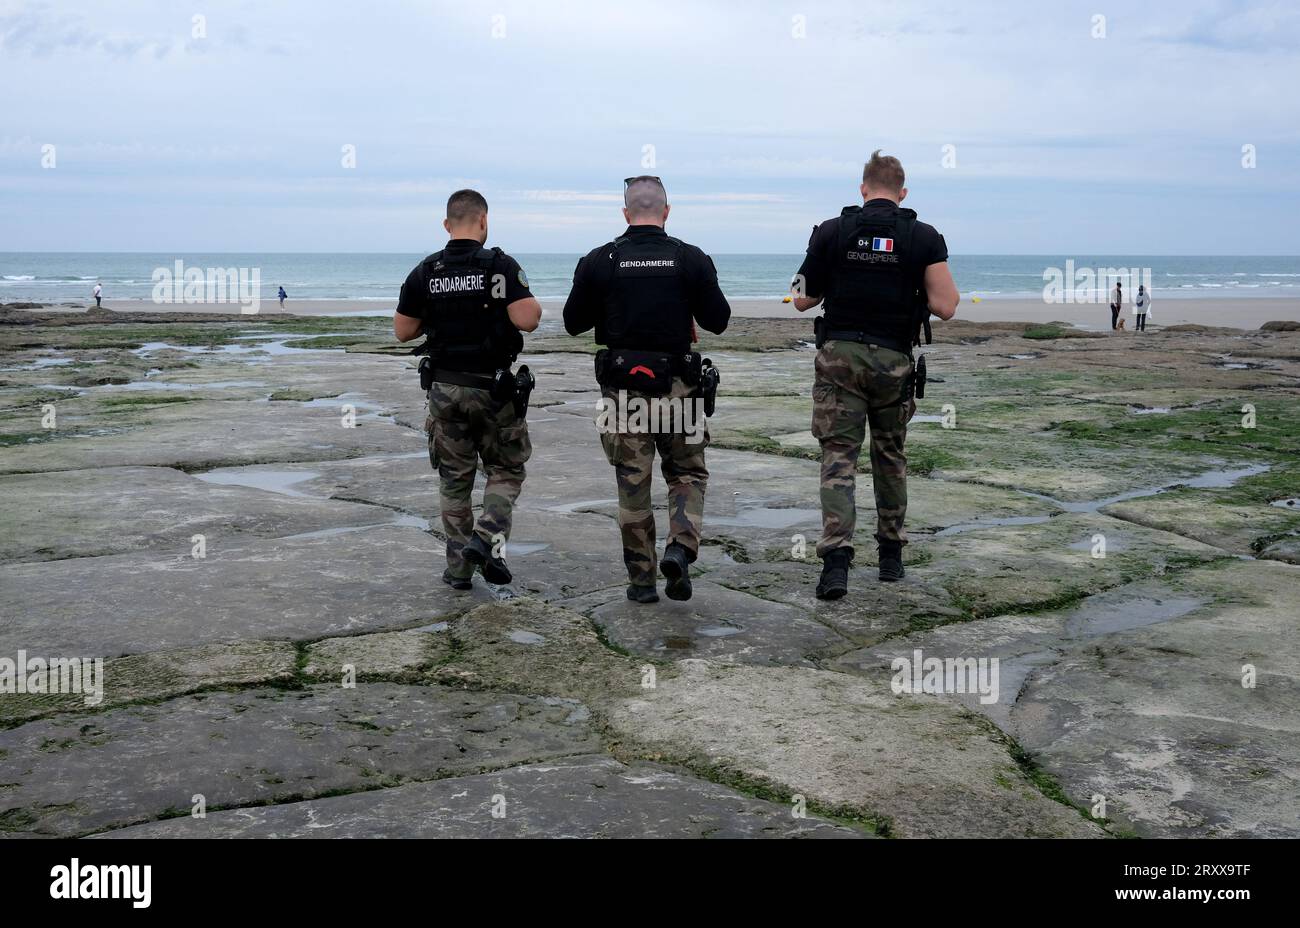 Ambleteuse, Northern France. September 27th 2023. French Gendarmes on beach patrol. Armed French police officers patroling the beach at Ambleteuse, one of the main channel crossing departure beaches used by migrants in dinghies trying to reach the UK. Credit: Dave Bagnall Stock Photo